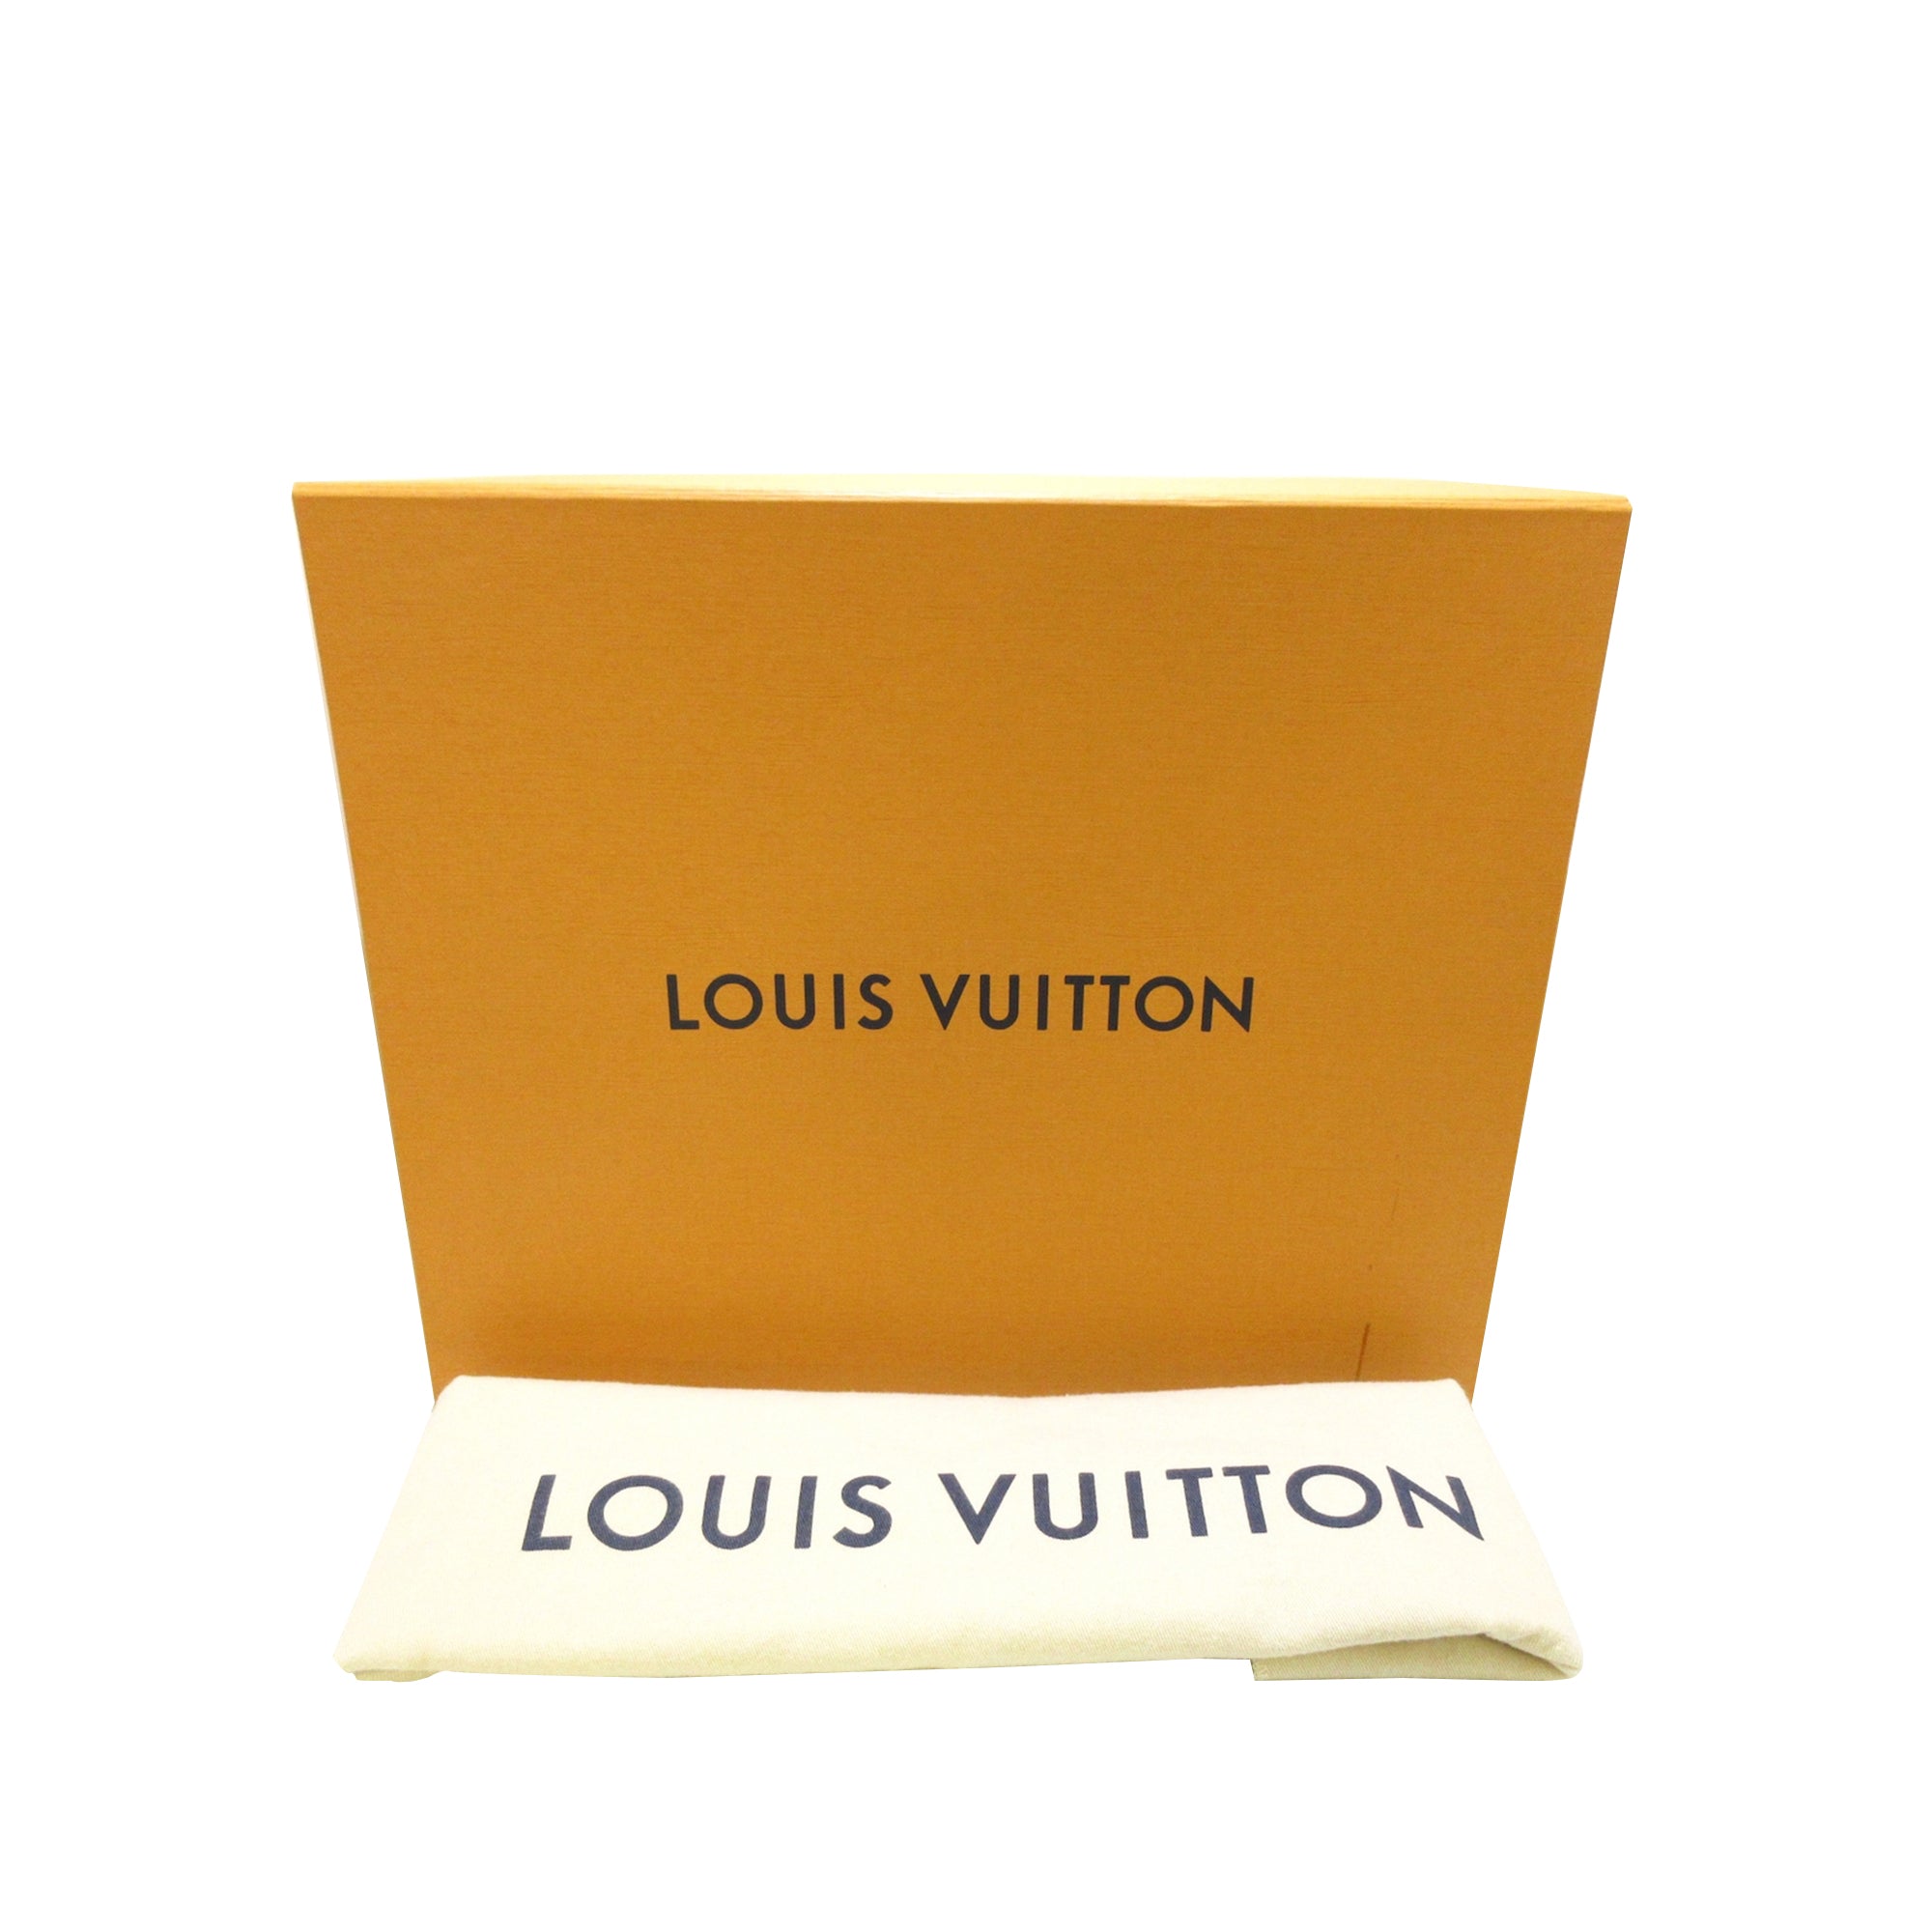 Louis+Vuitton+OnTheGo+Tote+MM+Black%2FBeige+Leather for sale online